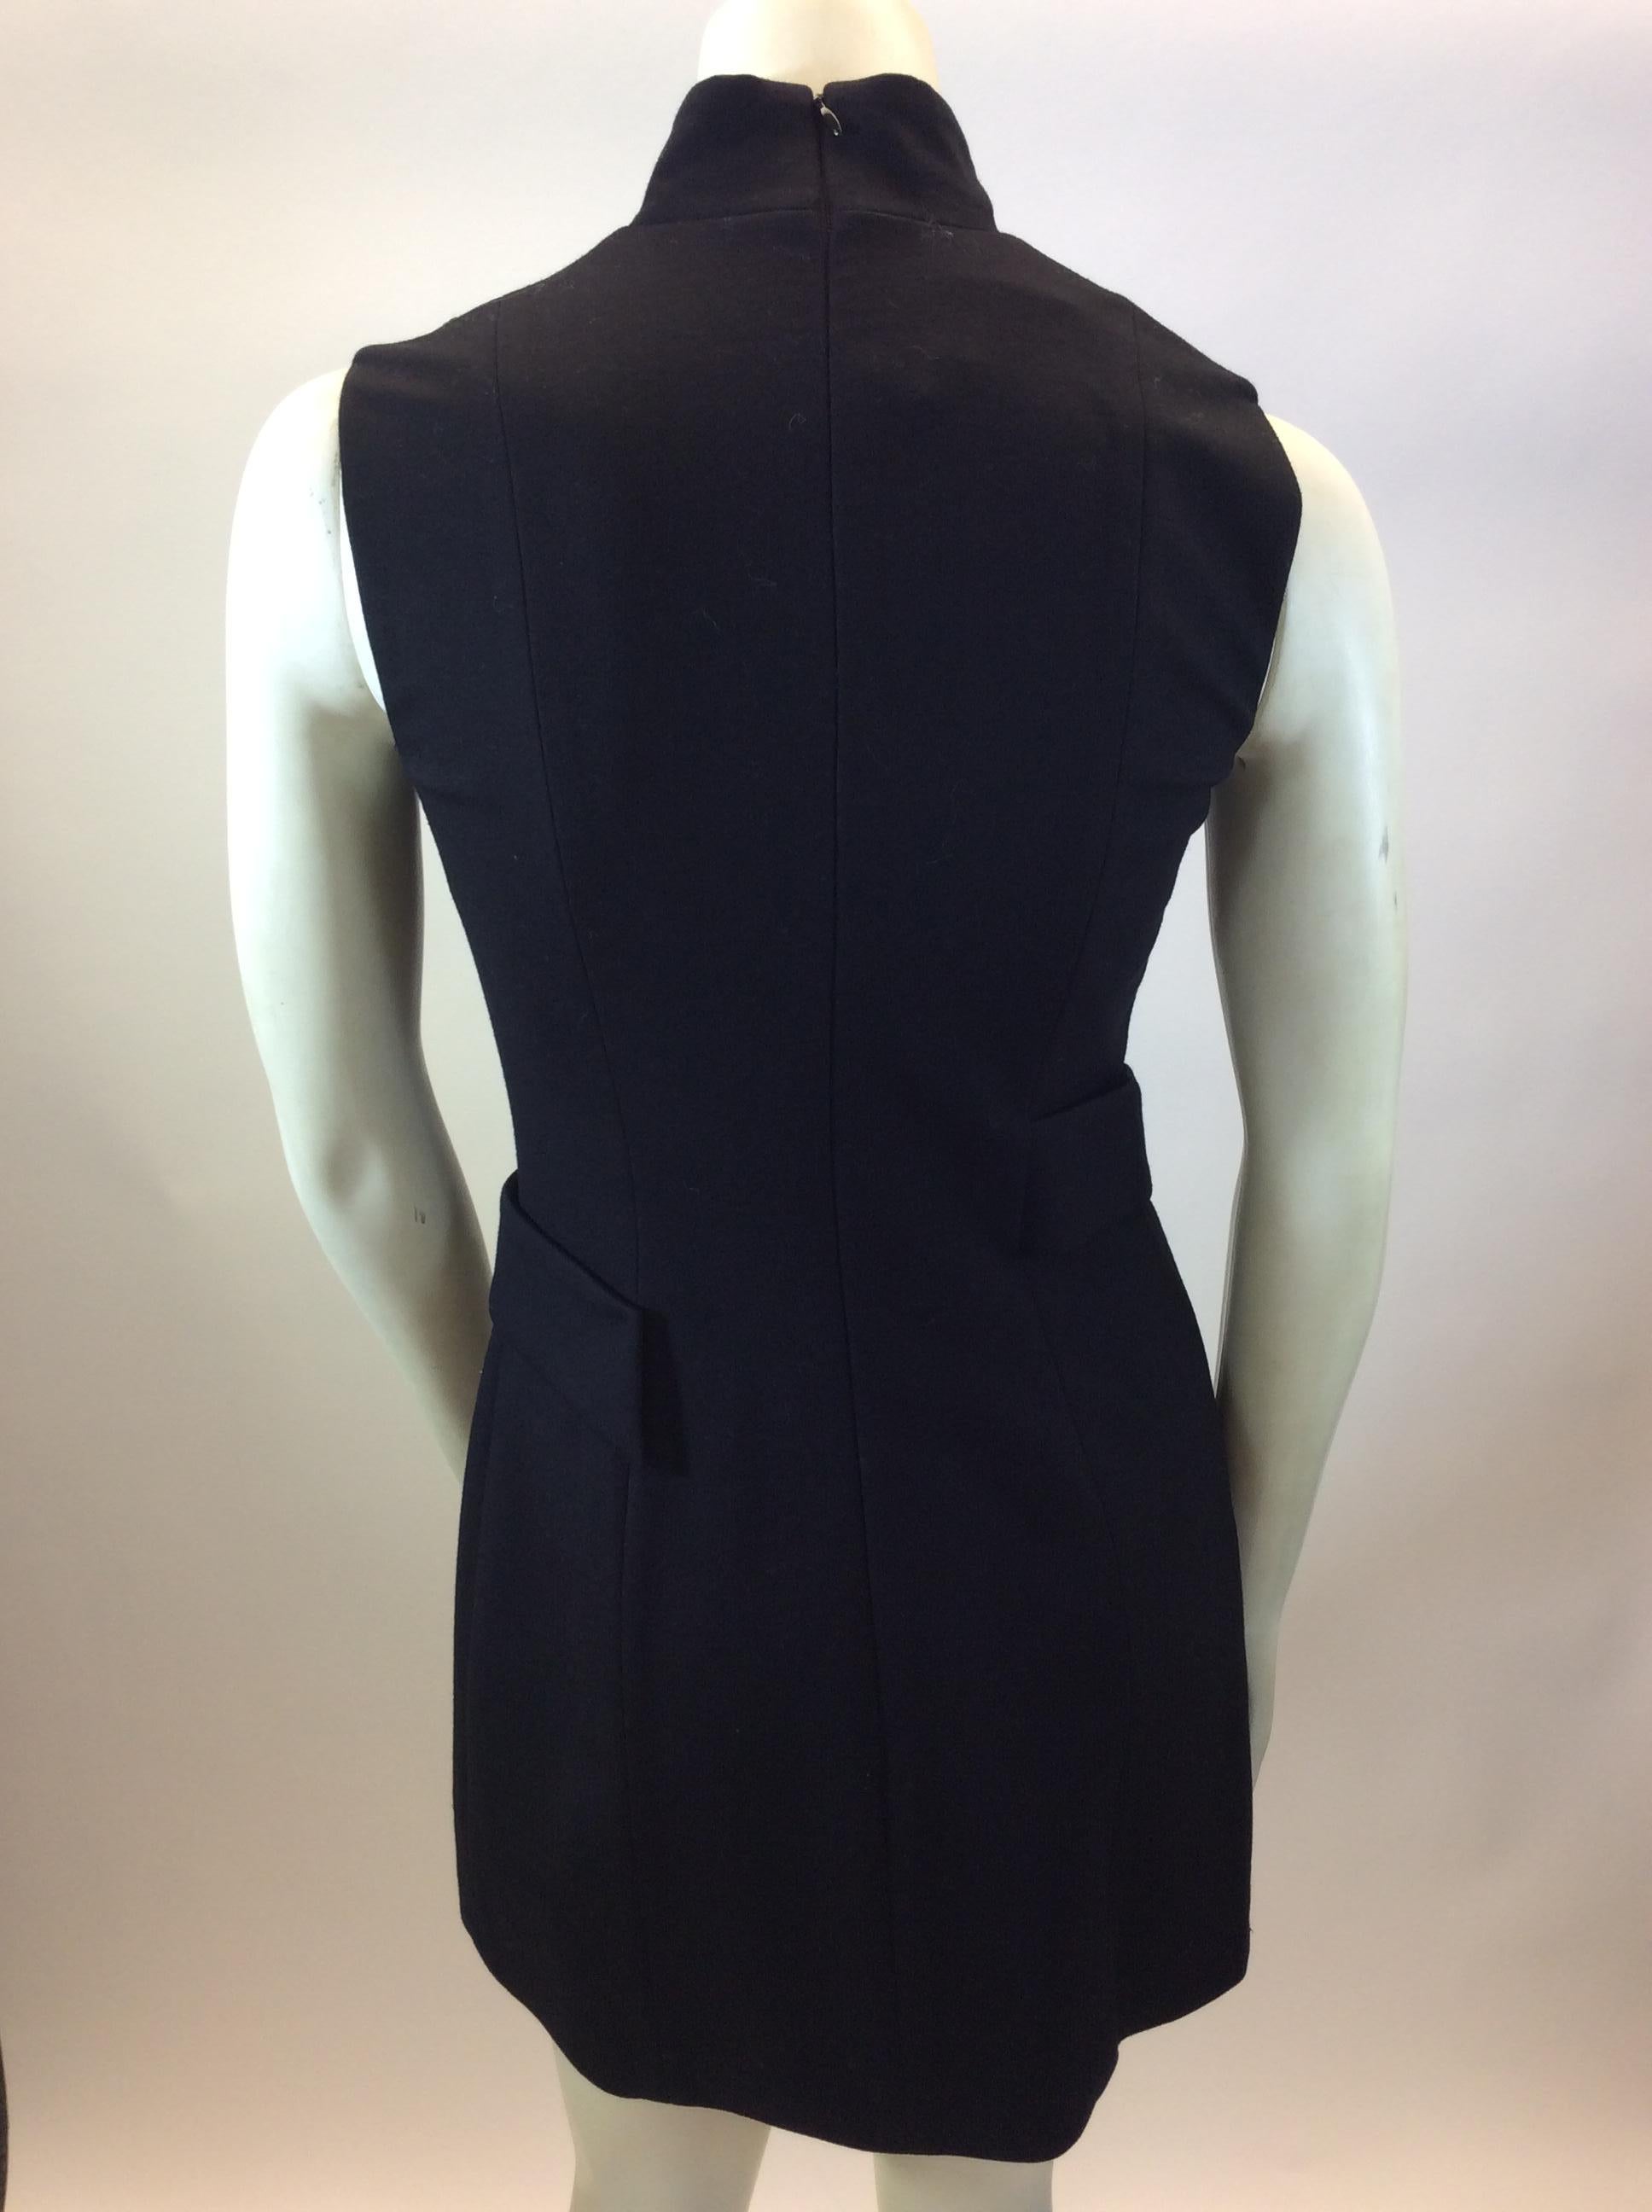 Akris Black Dress In Good Condition For Sale In Narberth, PA